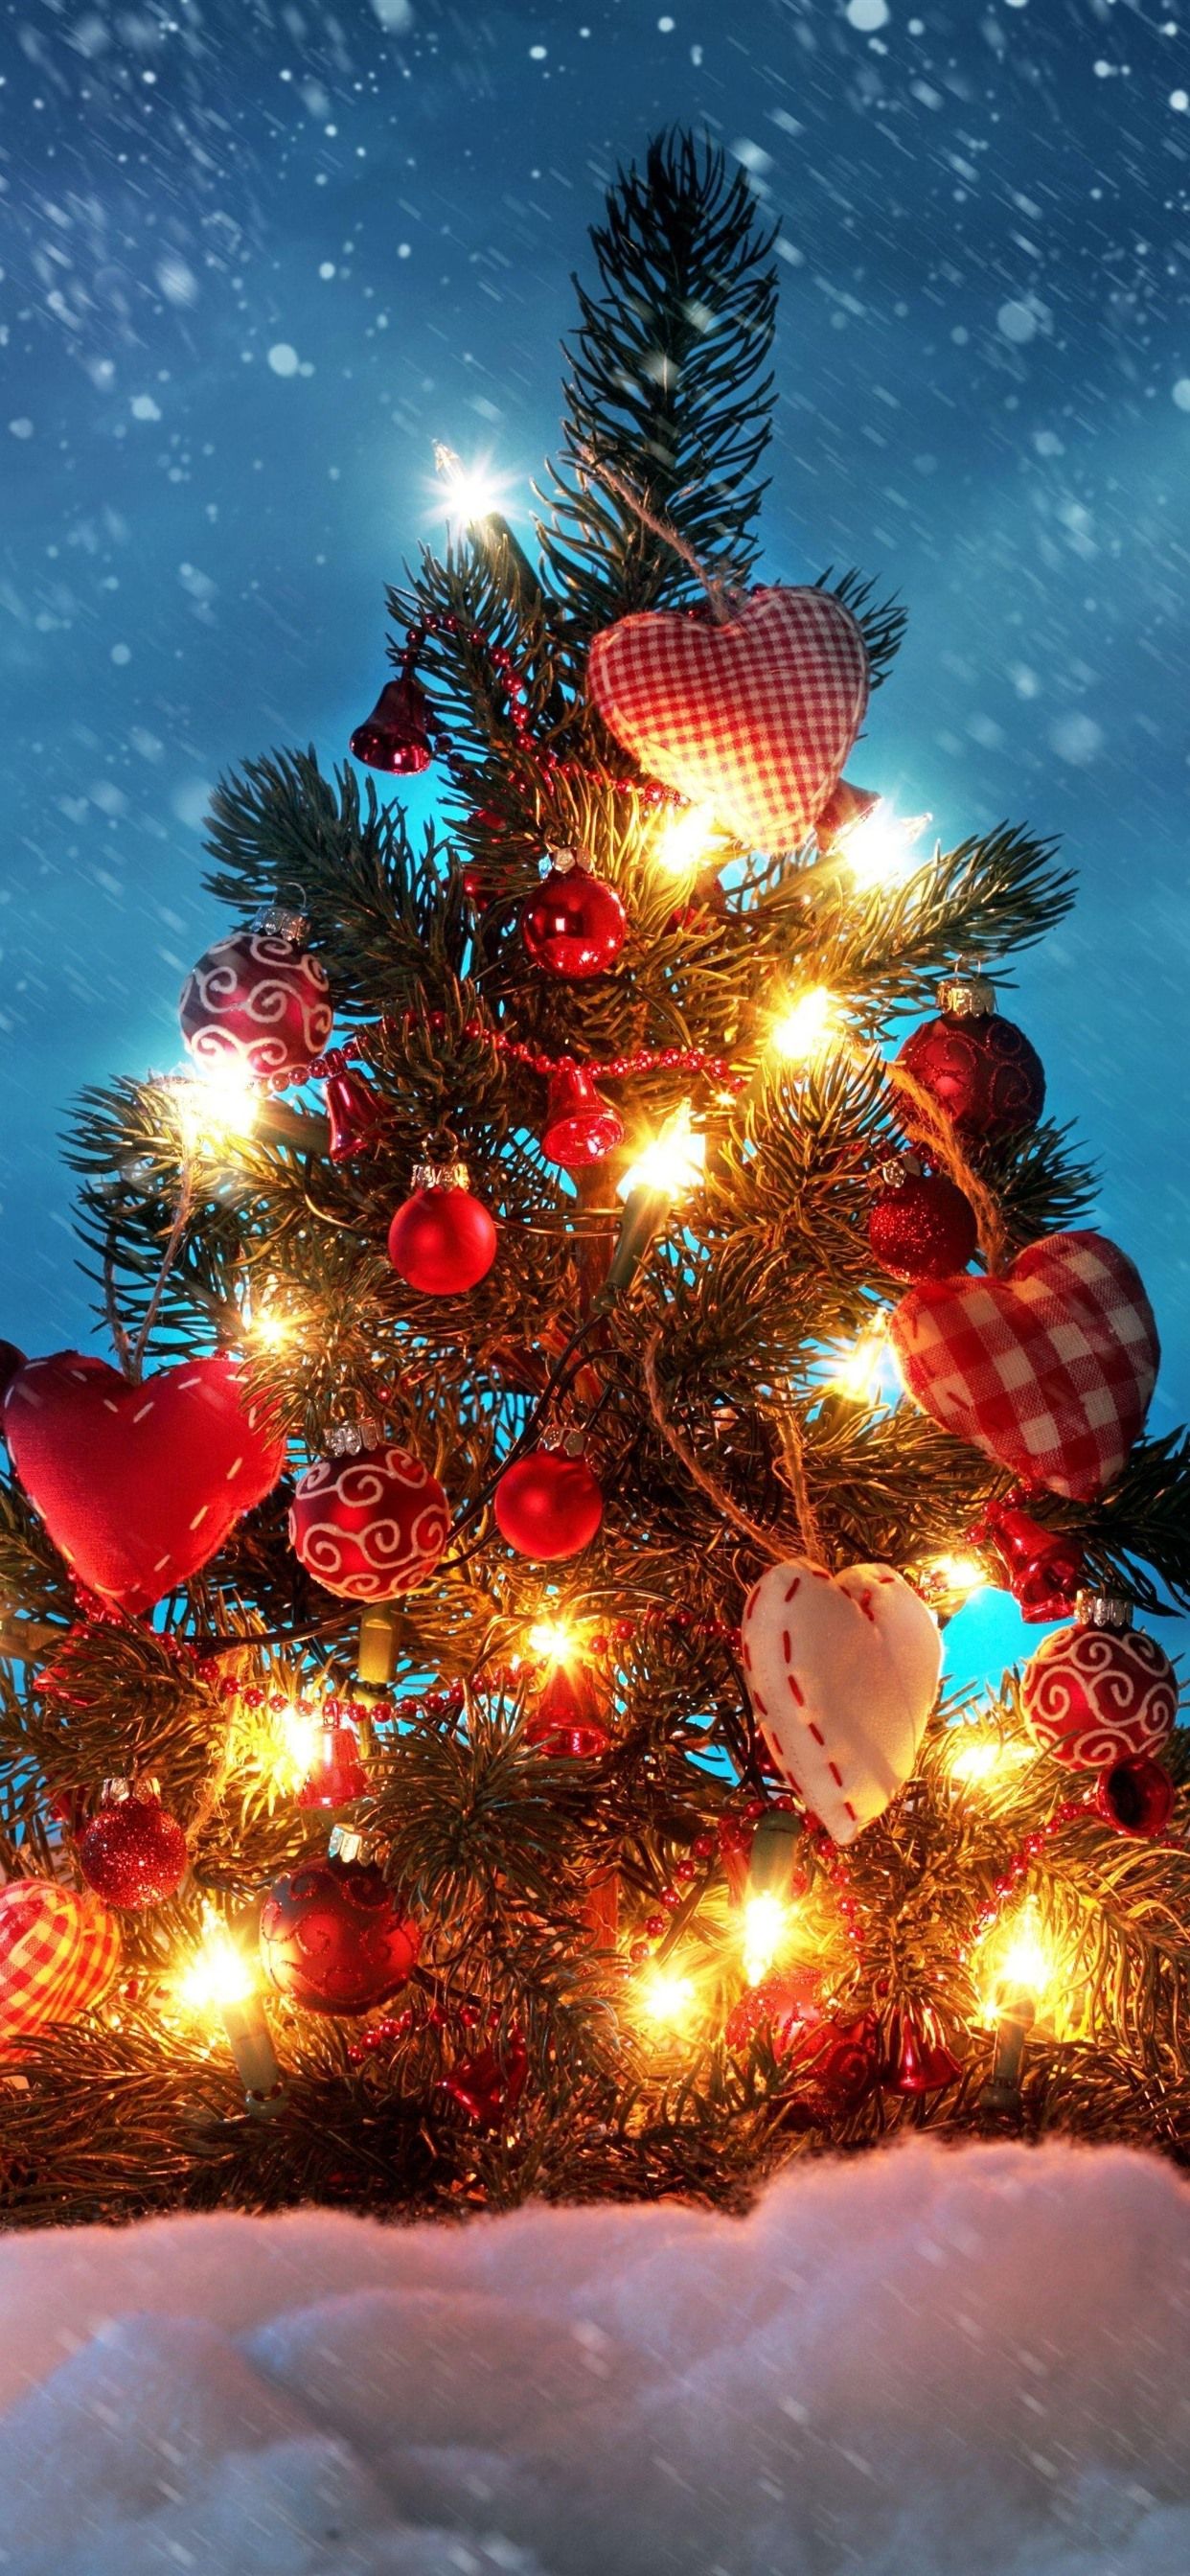 1300+ 4K Christmas Wallpapers | Background Images